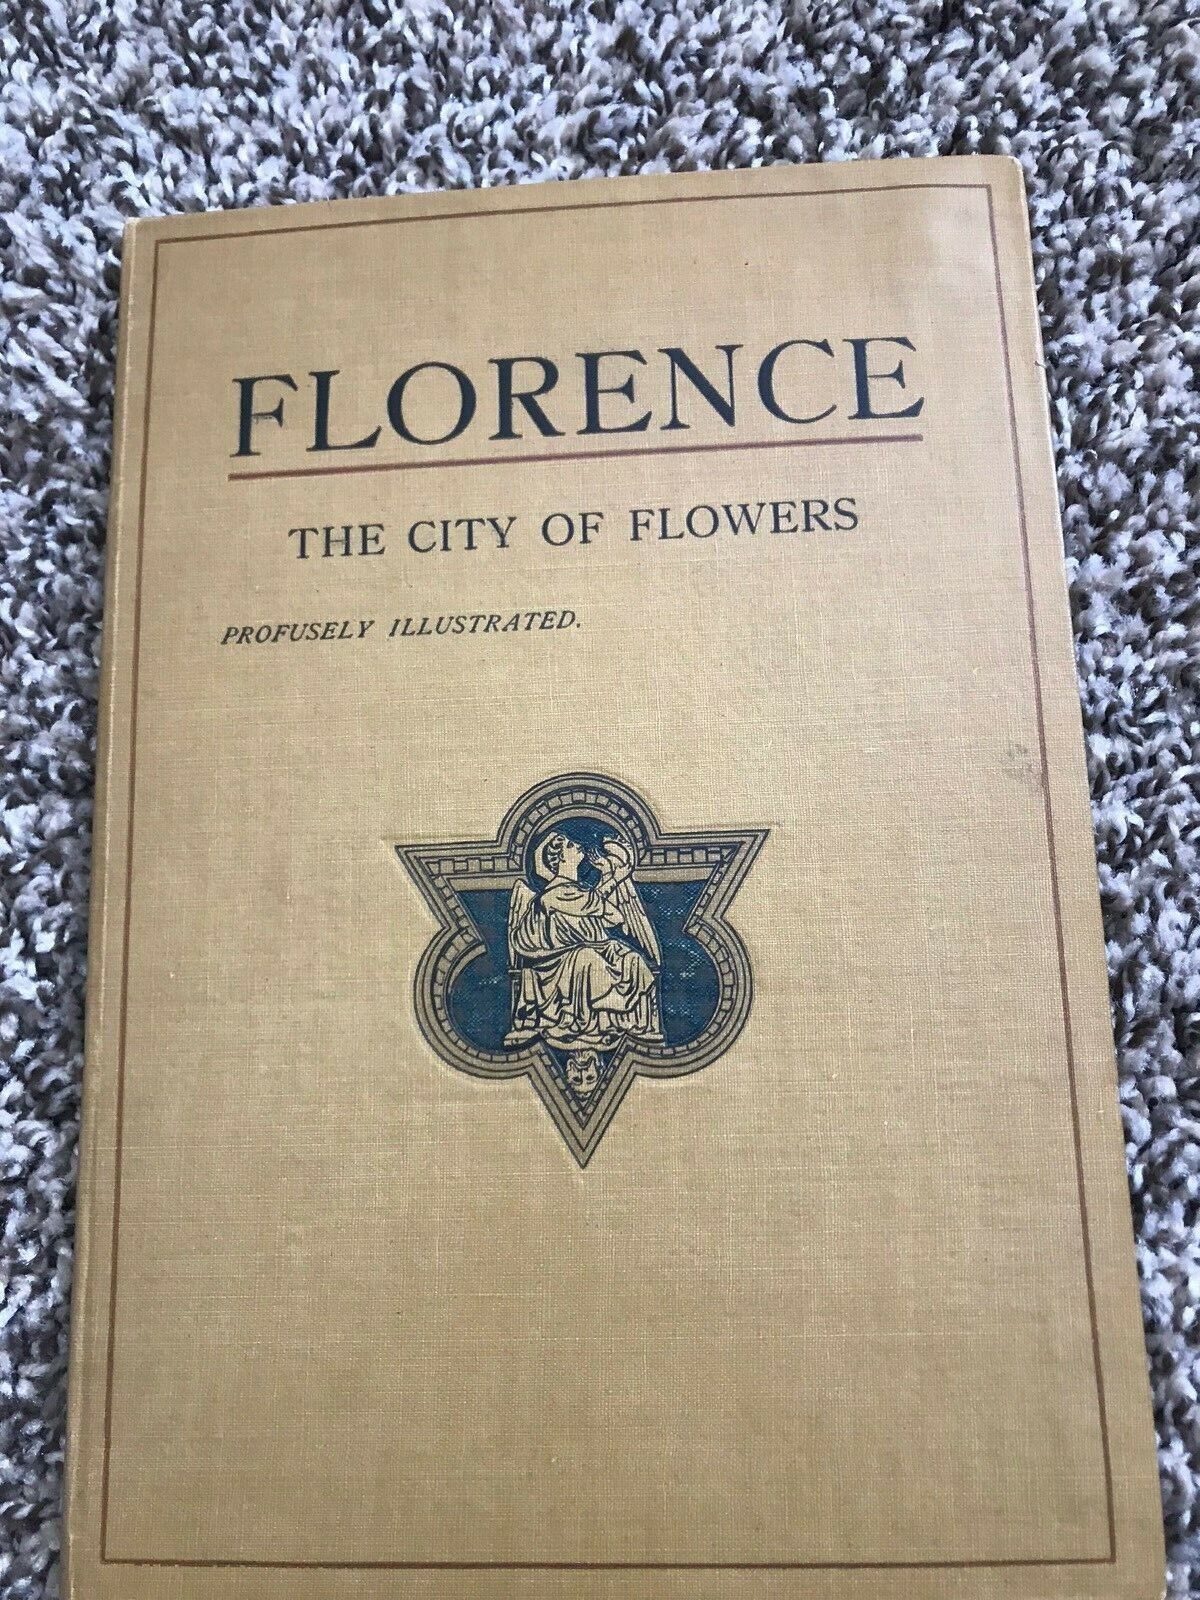 FLORENCE THE CITY OF FLOWERS 1924 The Medici Series No. 3 ok book 